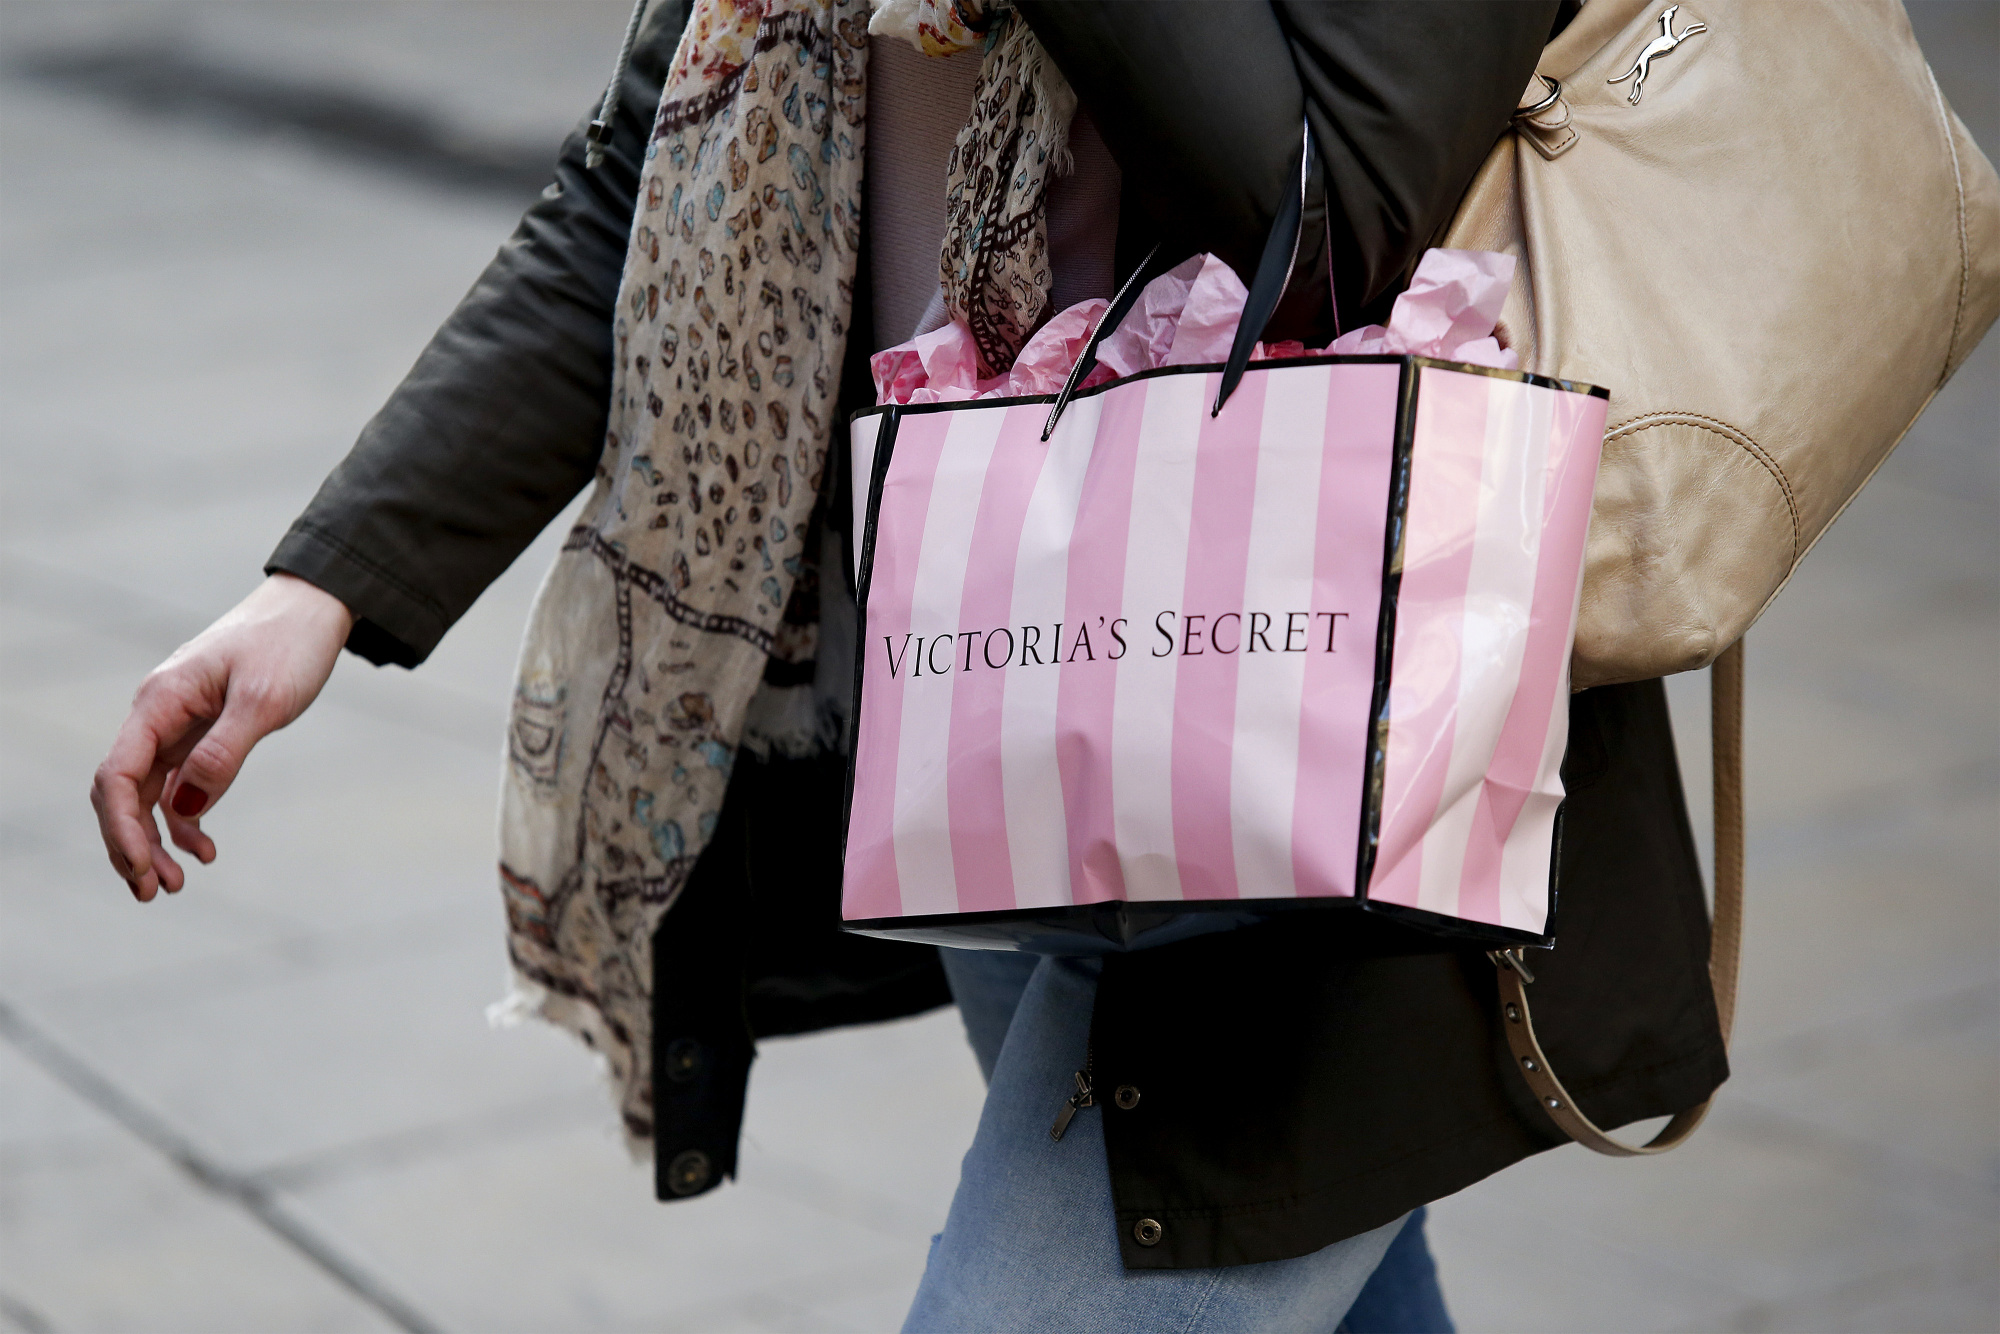 Victoria's Secret (LB) Sells High-End French Lingerie LIVY - Bloomberg